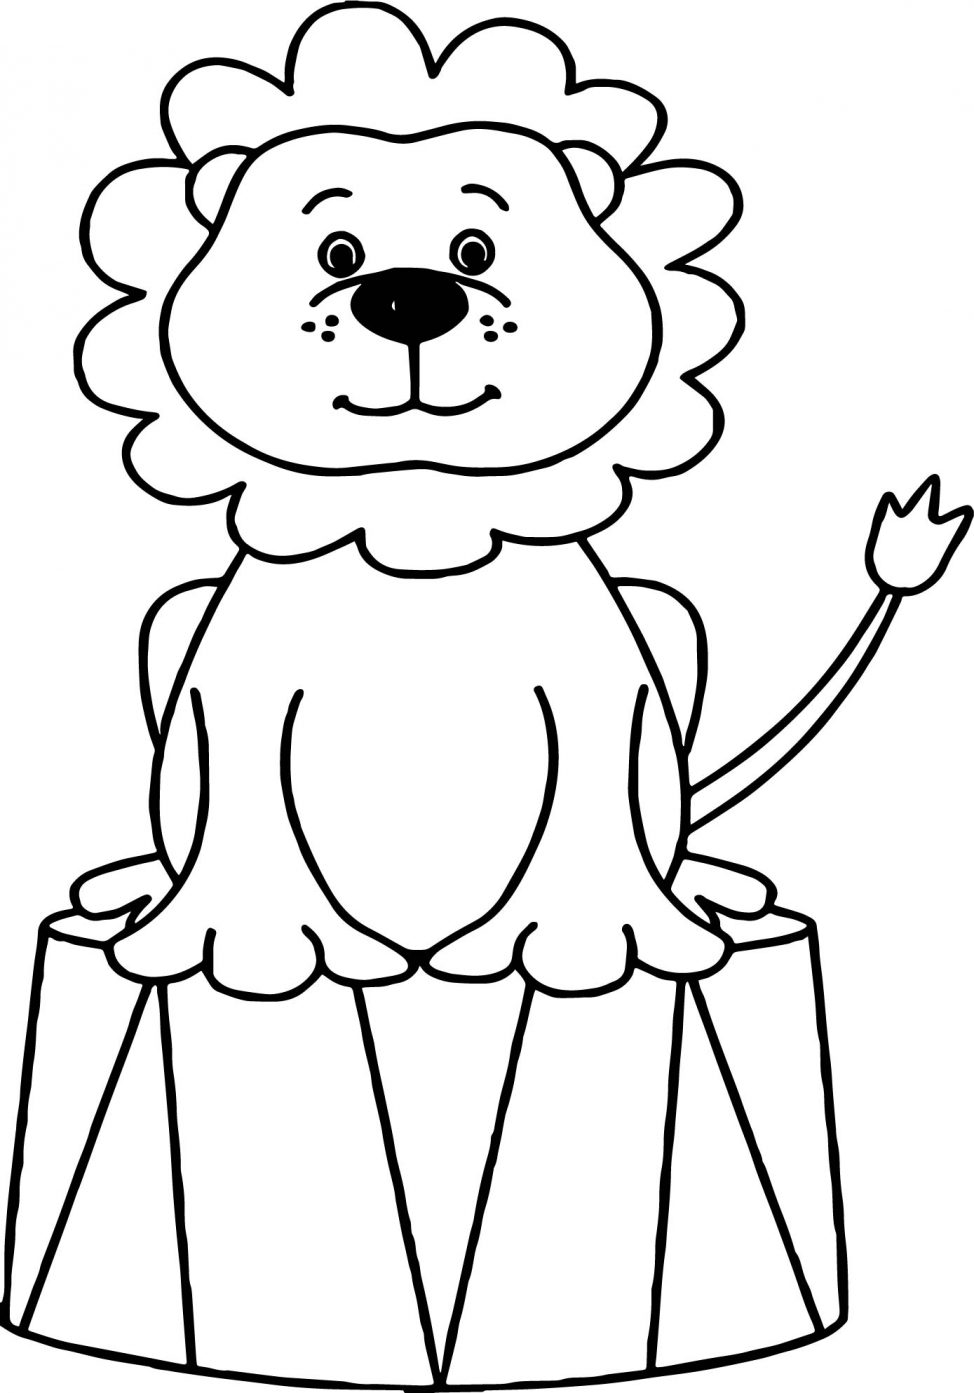 circus-ringmaster-coloring-pages-coloring-pages